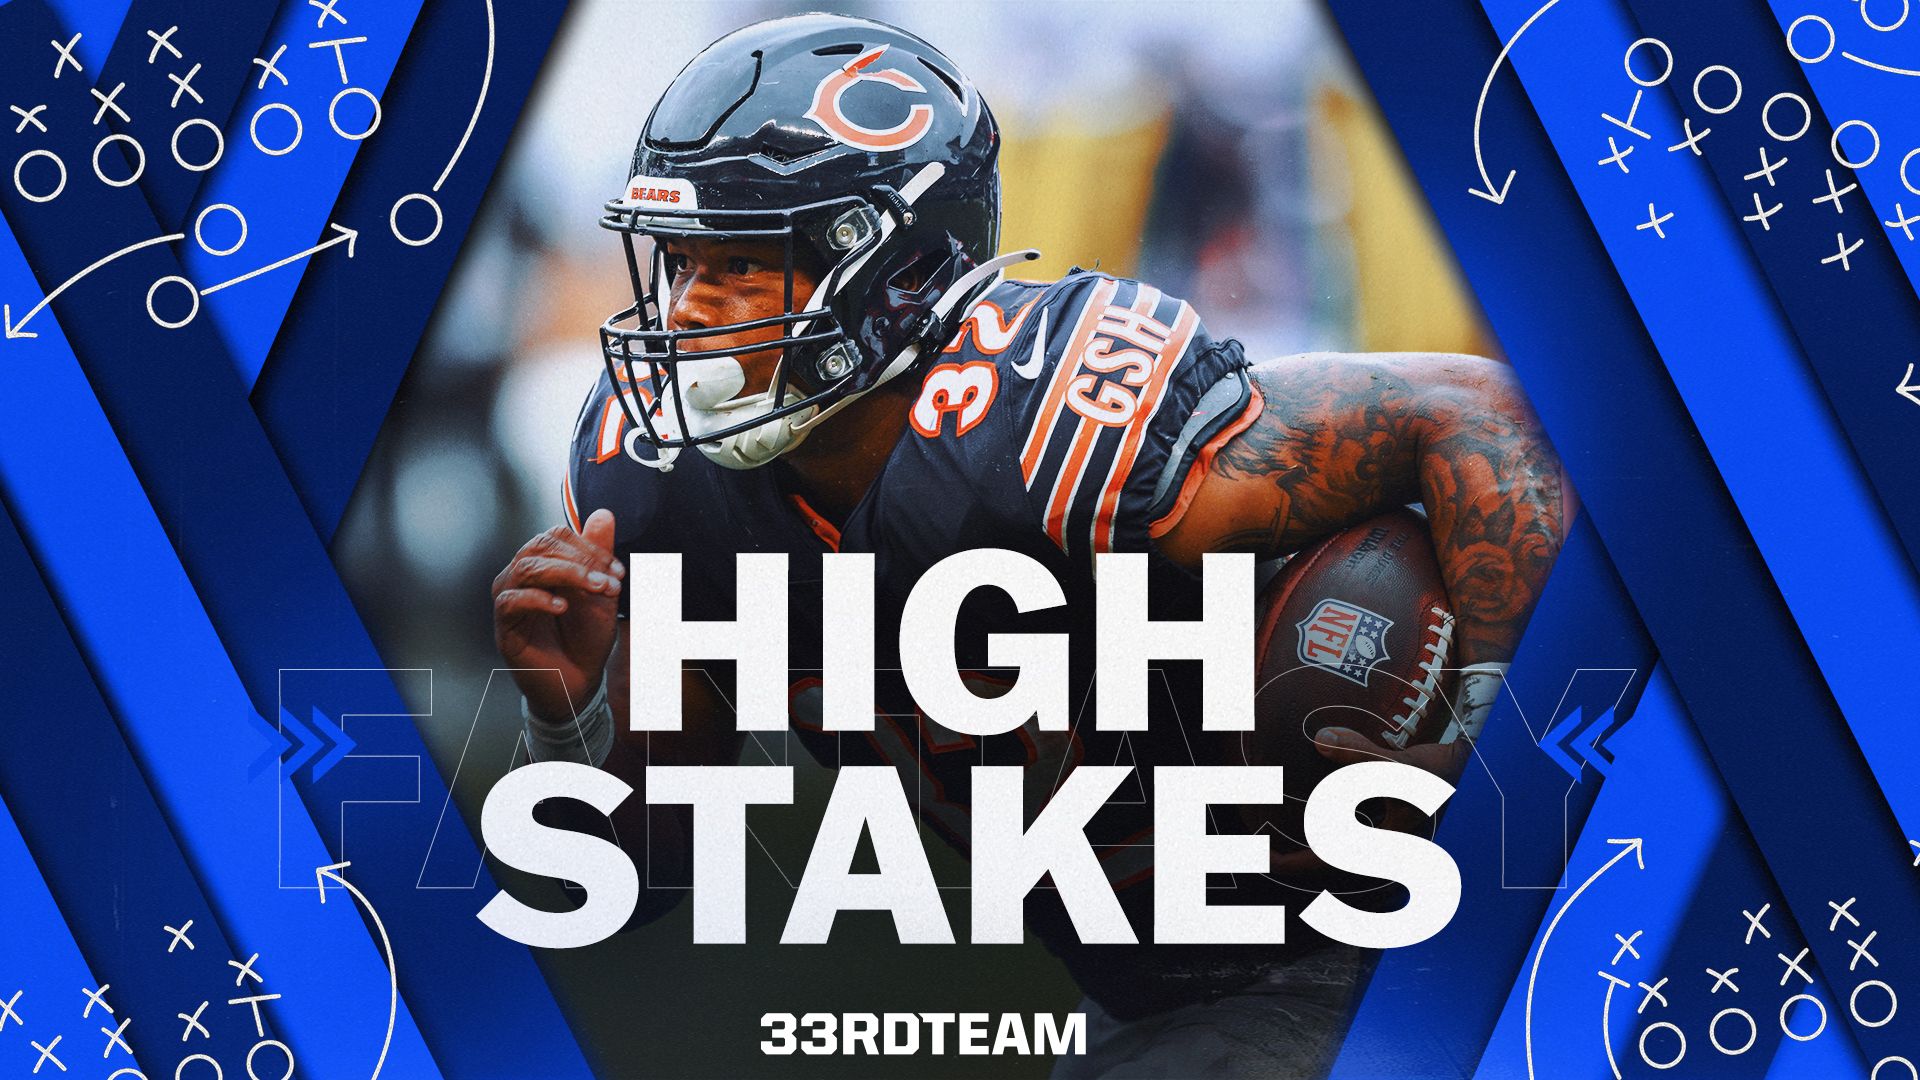 2022 Week 3 DFS High Stakes Advice from a Milly Maker Winner